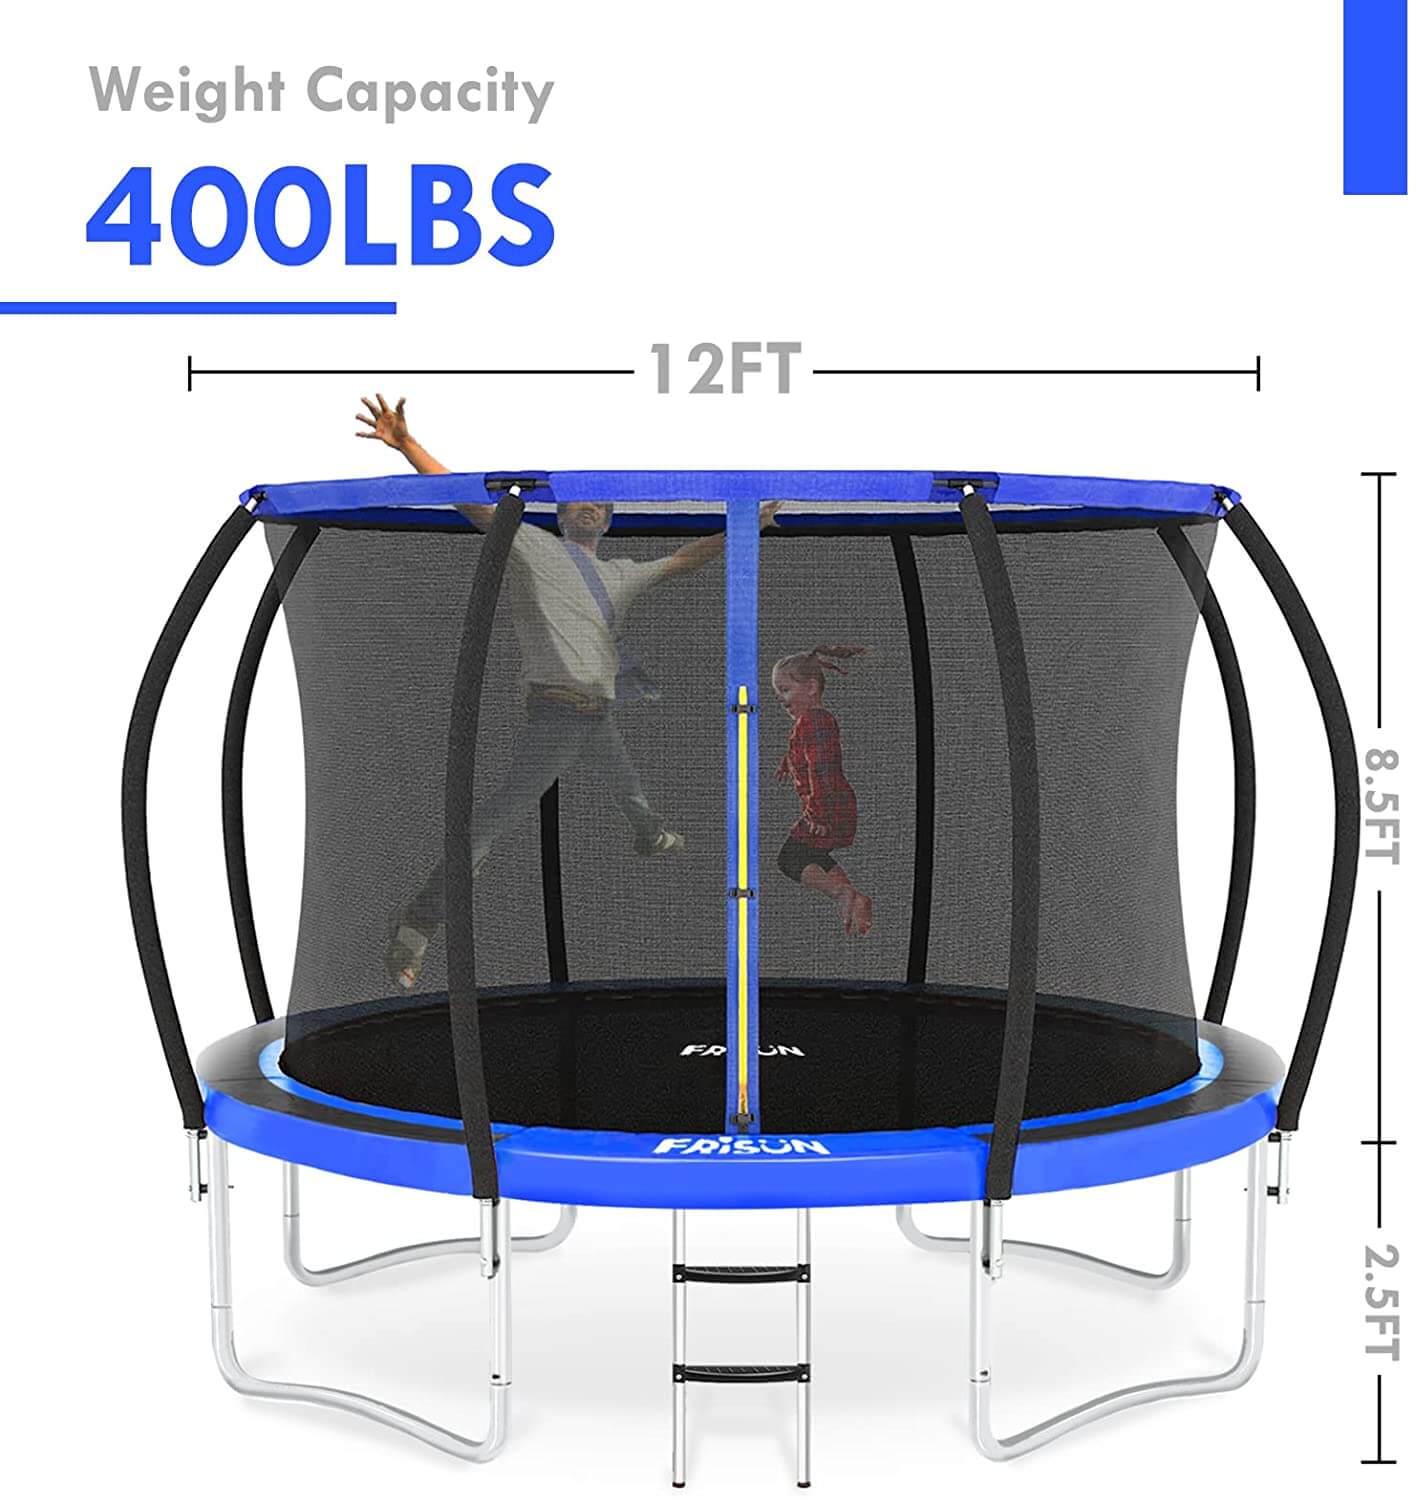 2022 NEW  - Double Safety Guarantee - 12 FT Outdoor Trampoline For Kids And Adults With Safety Enclosure And Ladder 450LBS Capacity - Blue